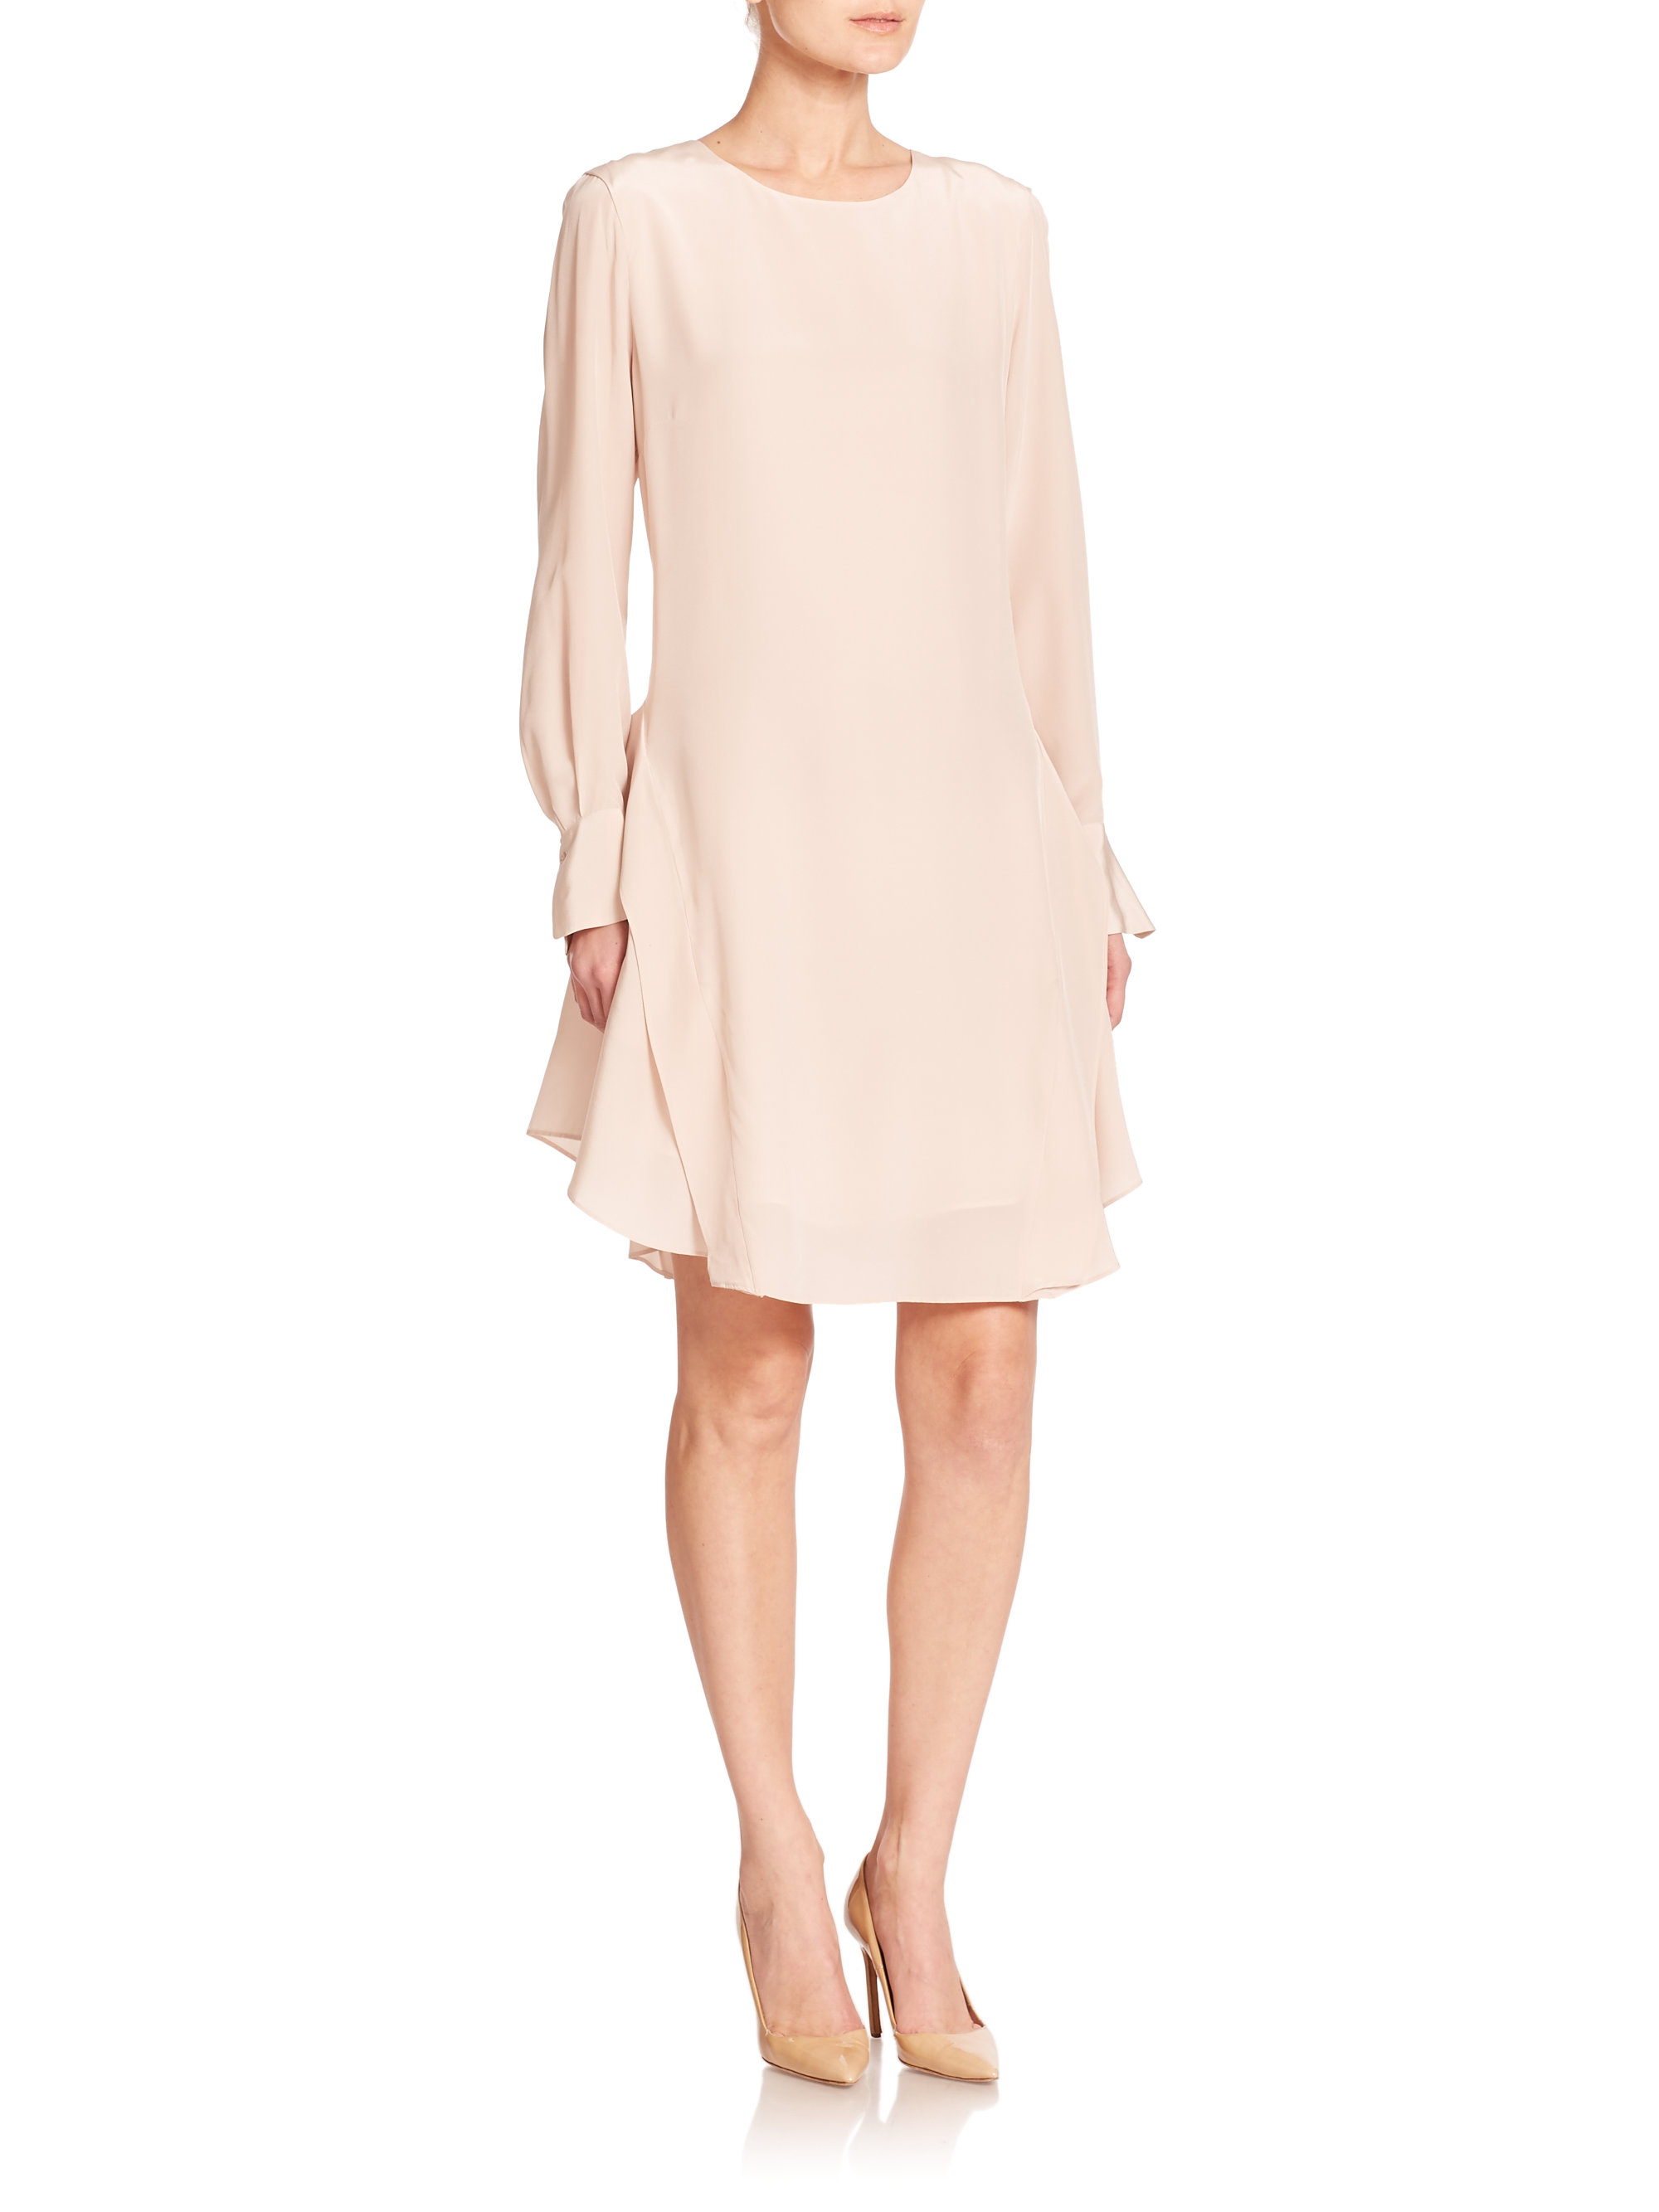 Lyst - See By Chloé Layered Silk Dress in Pink